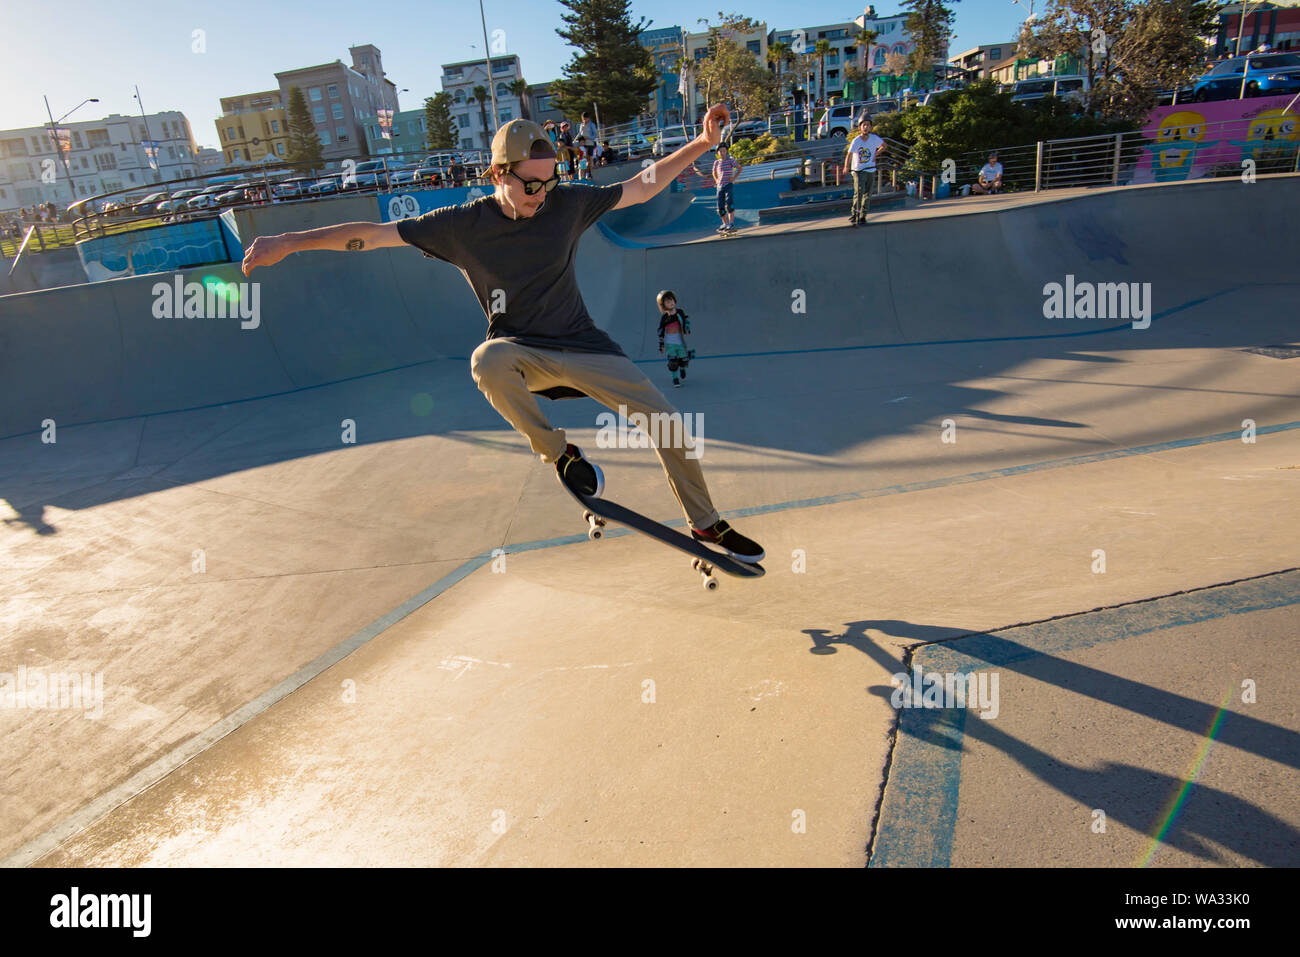 In the late summer afternoon sun at the Bondi Beach Skate Park a young male skateboarder gets some air. Stock Photo